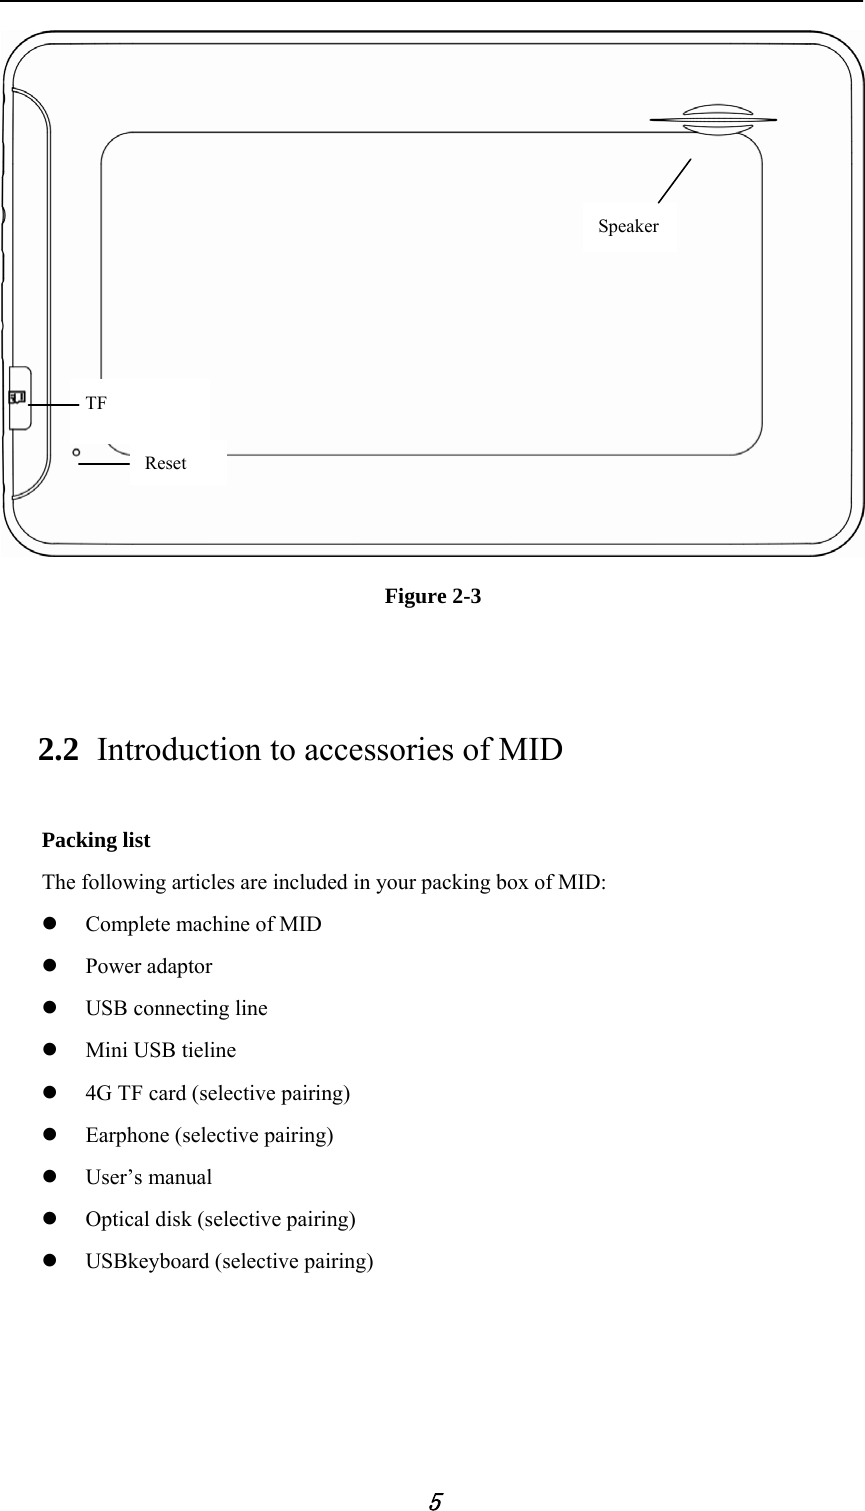     5  Figure 2-3  2.2 Introduction to accessories of MID Packing list The following articles are included in your packing box of MID: z Complete machine of MID z Power adaptor z USB connecting line z Mini USB tieline z 4G TF card (selective pairing) z Earphone (selective pairing) z User’s manual z Optical disk (selective pairing) z USBkeyboard (selective pairing) SpeakerTF Reset 